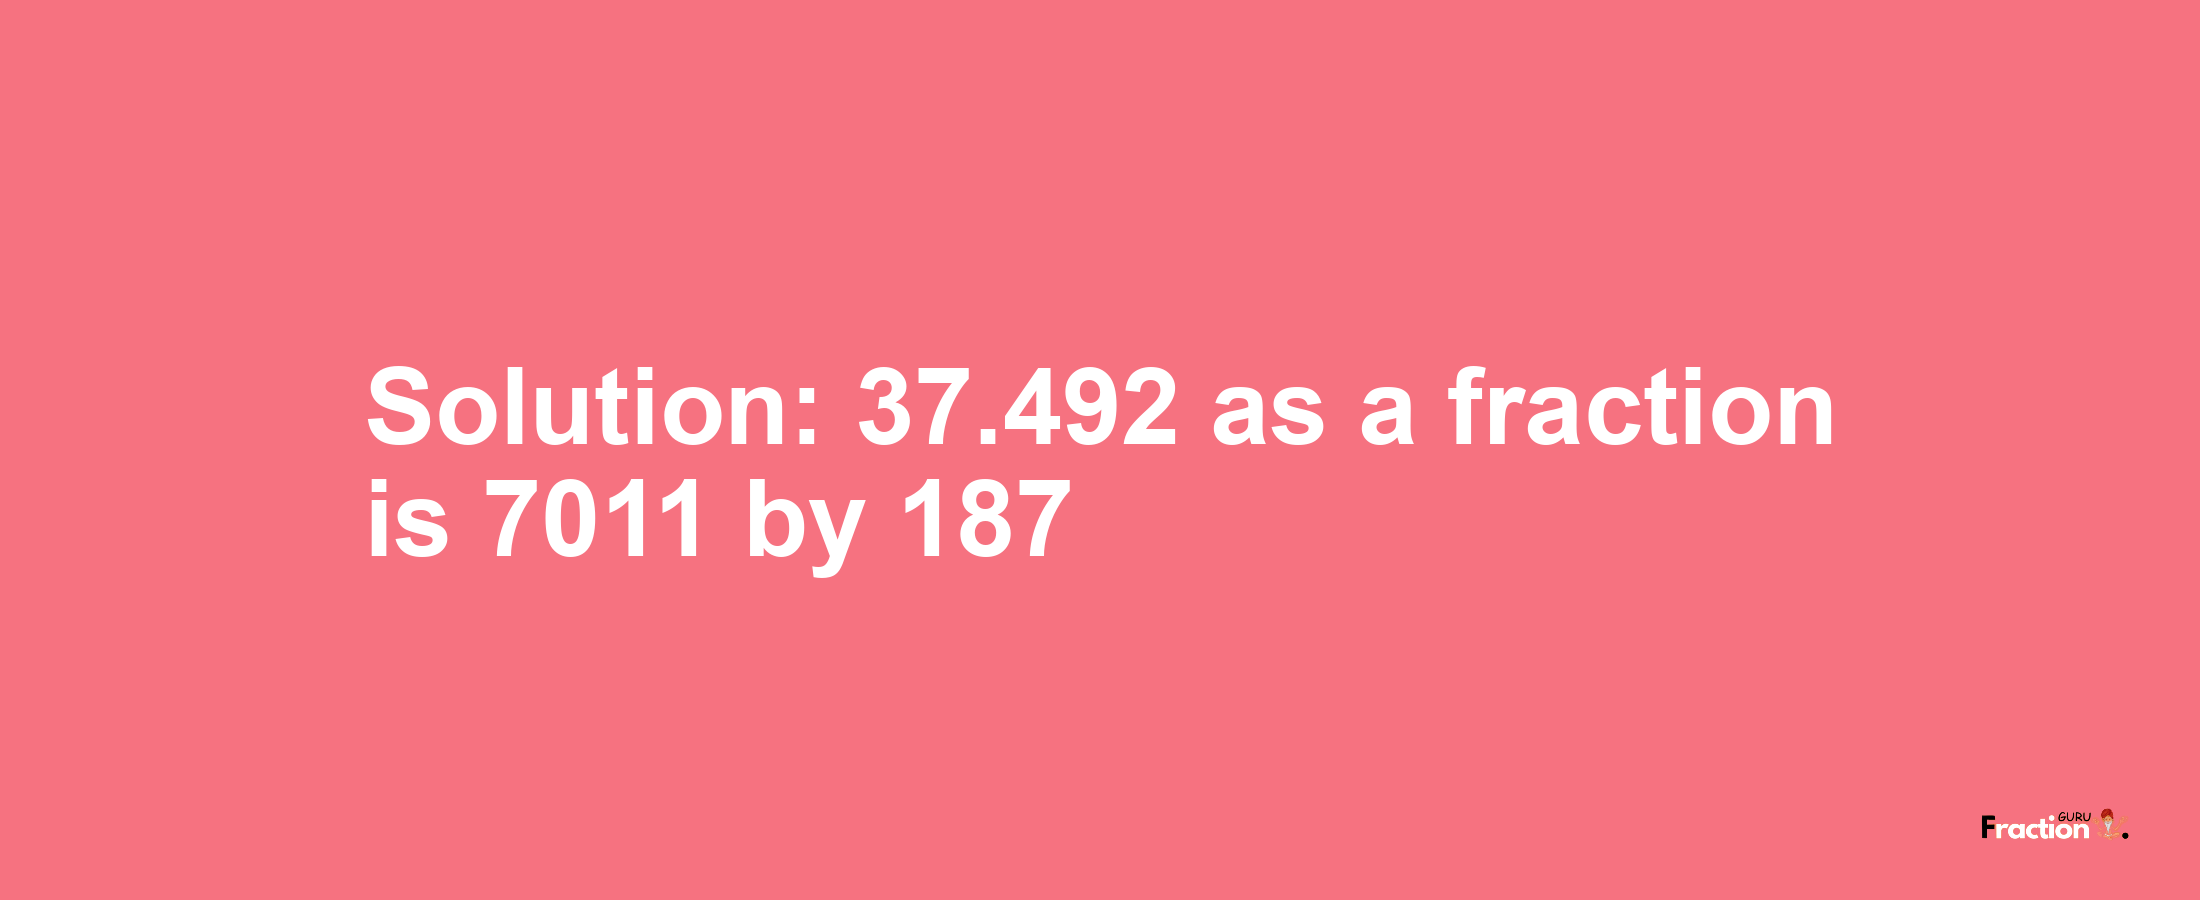 Solution:37.492 as a fraction is 7011/187